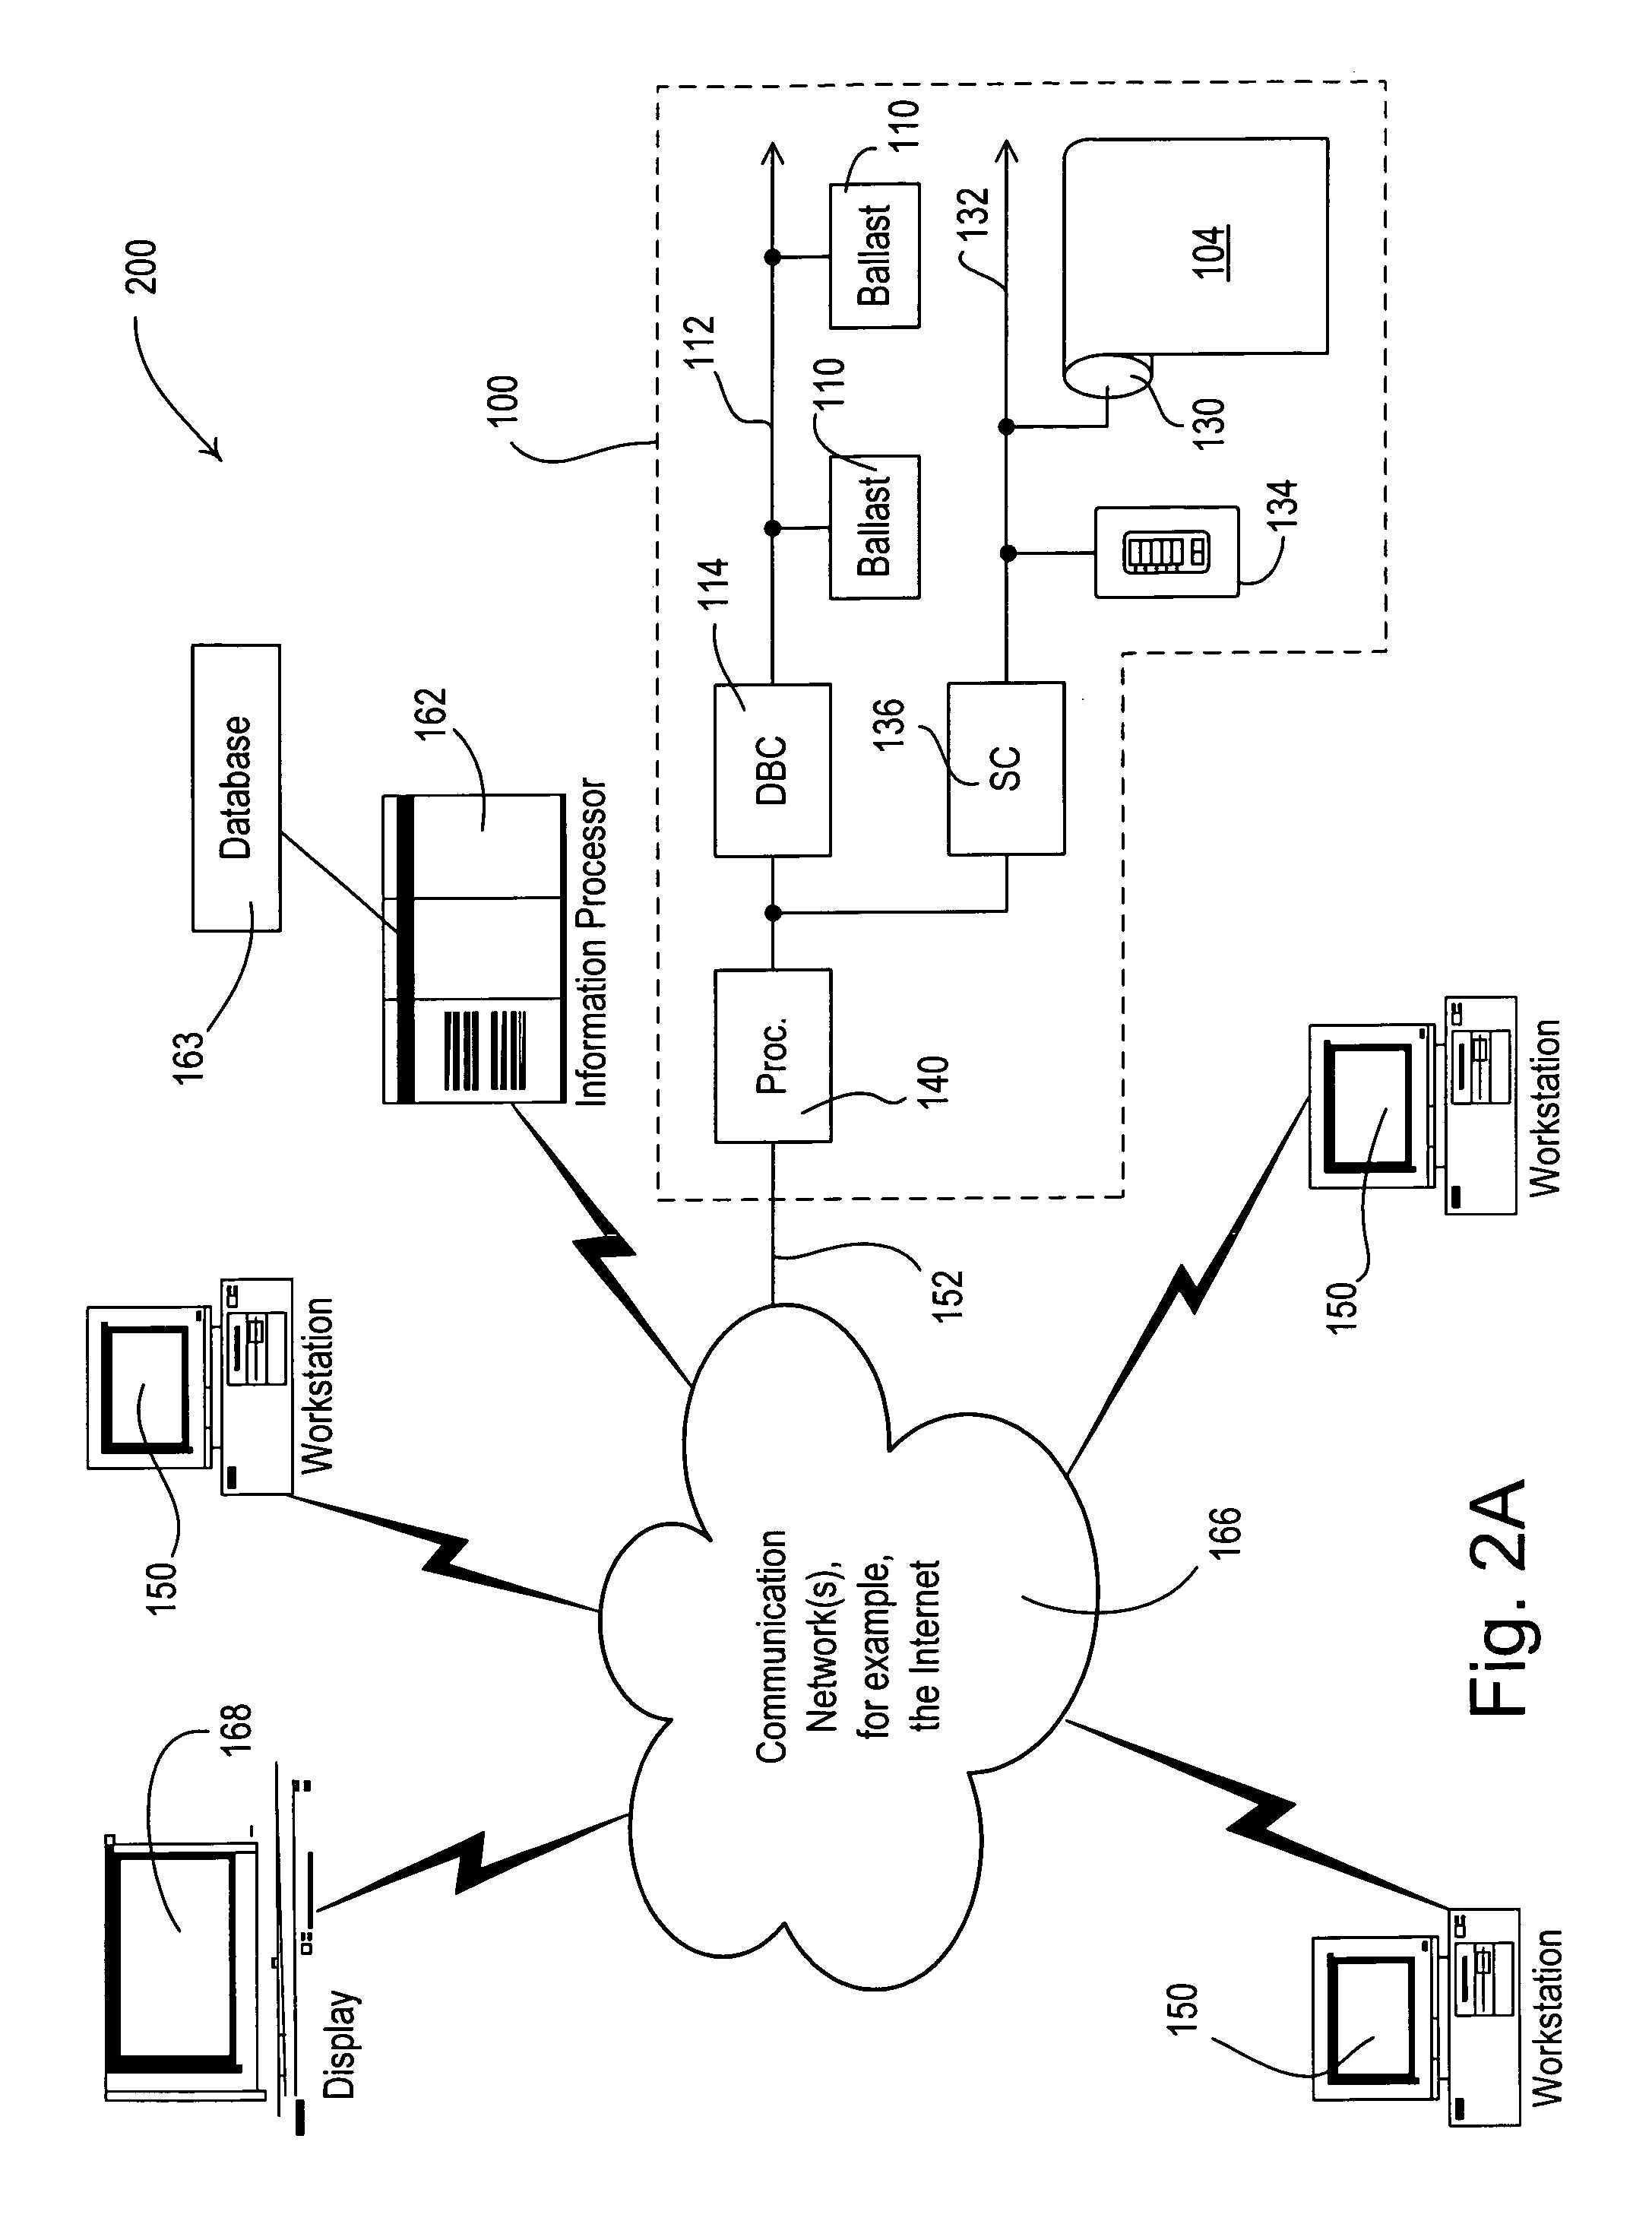 System and method for graphically displaying energy consumption and savings